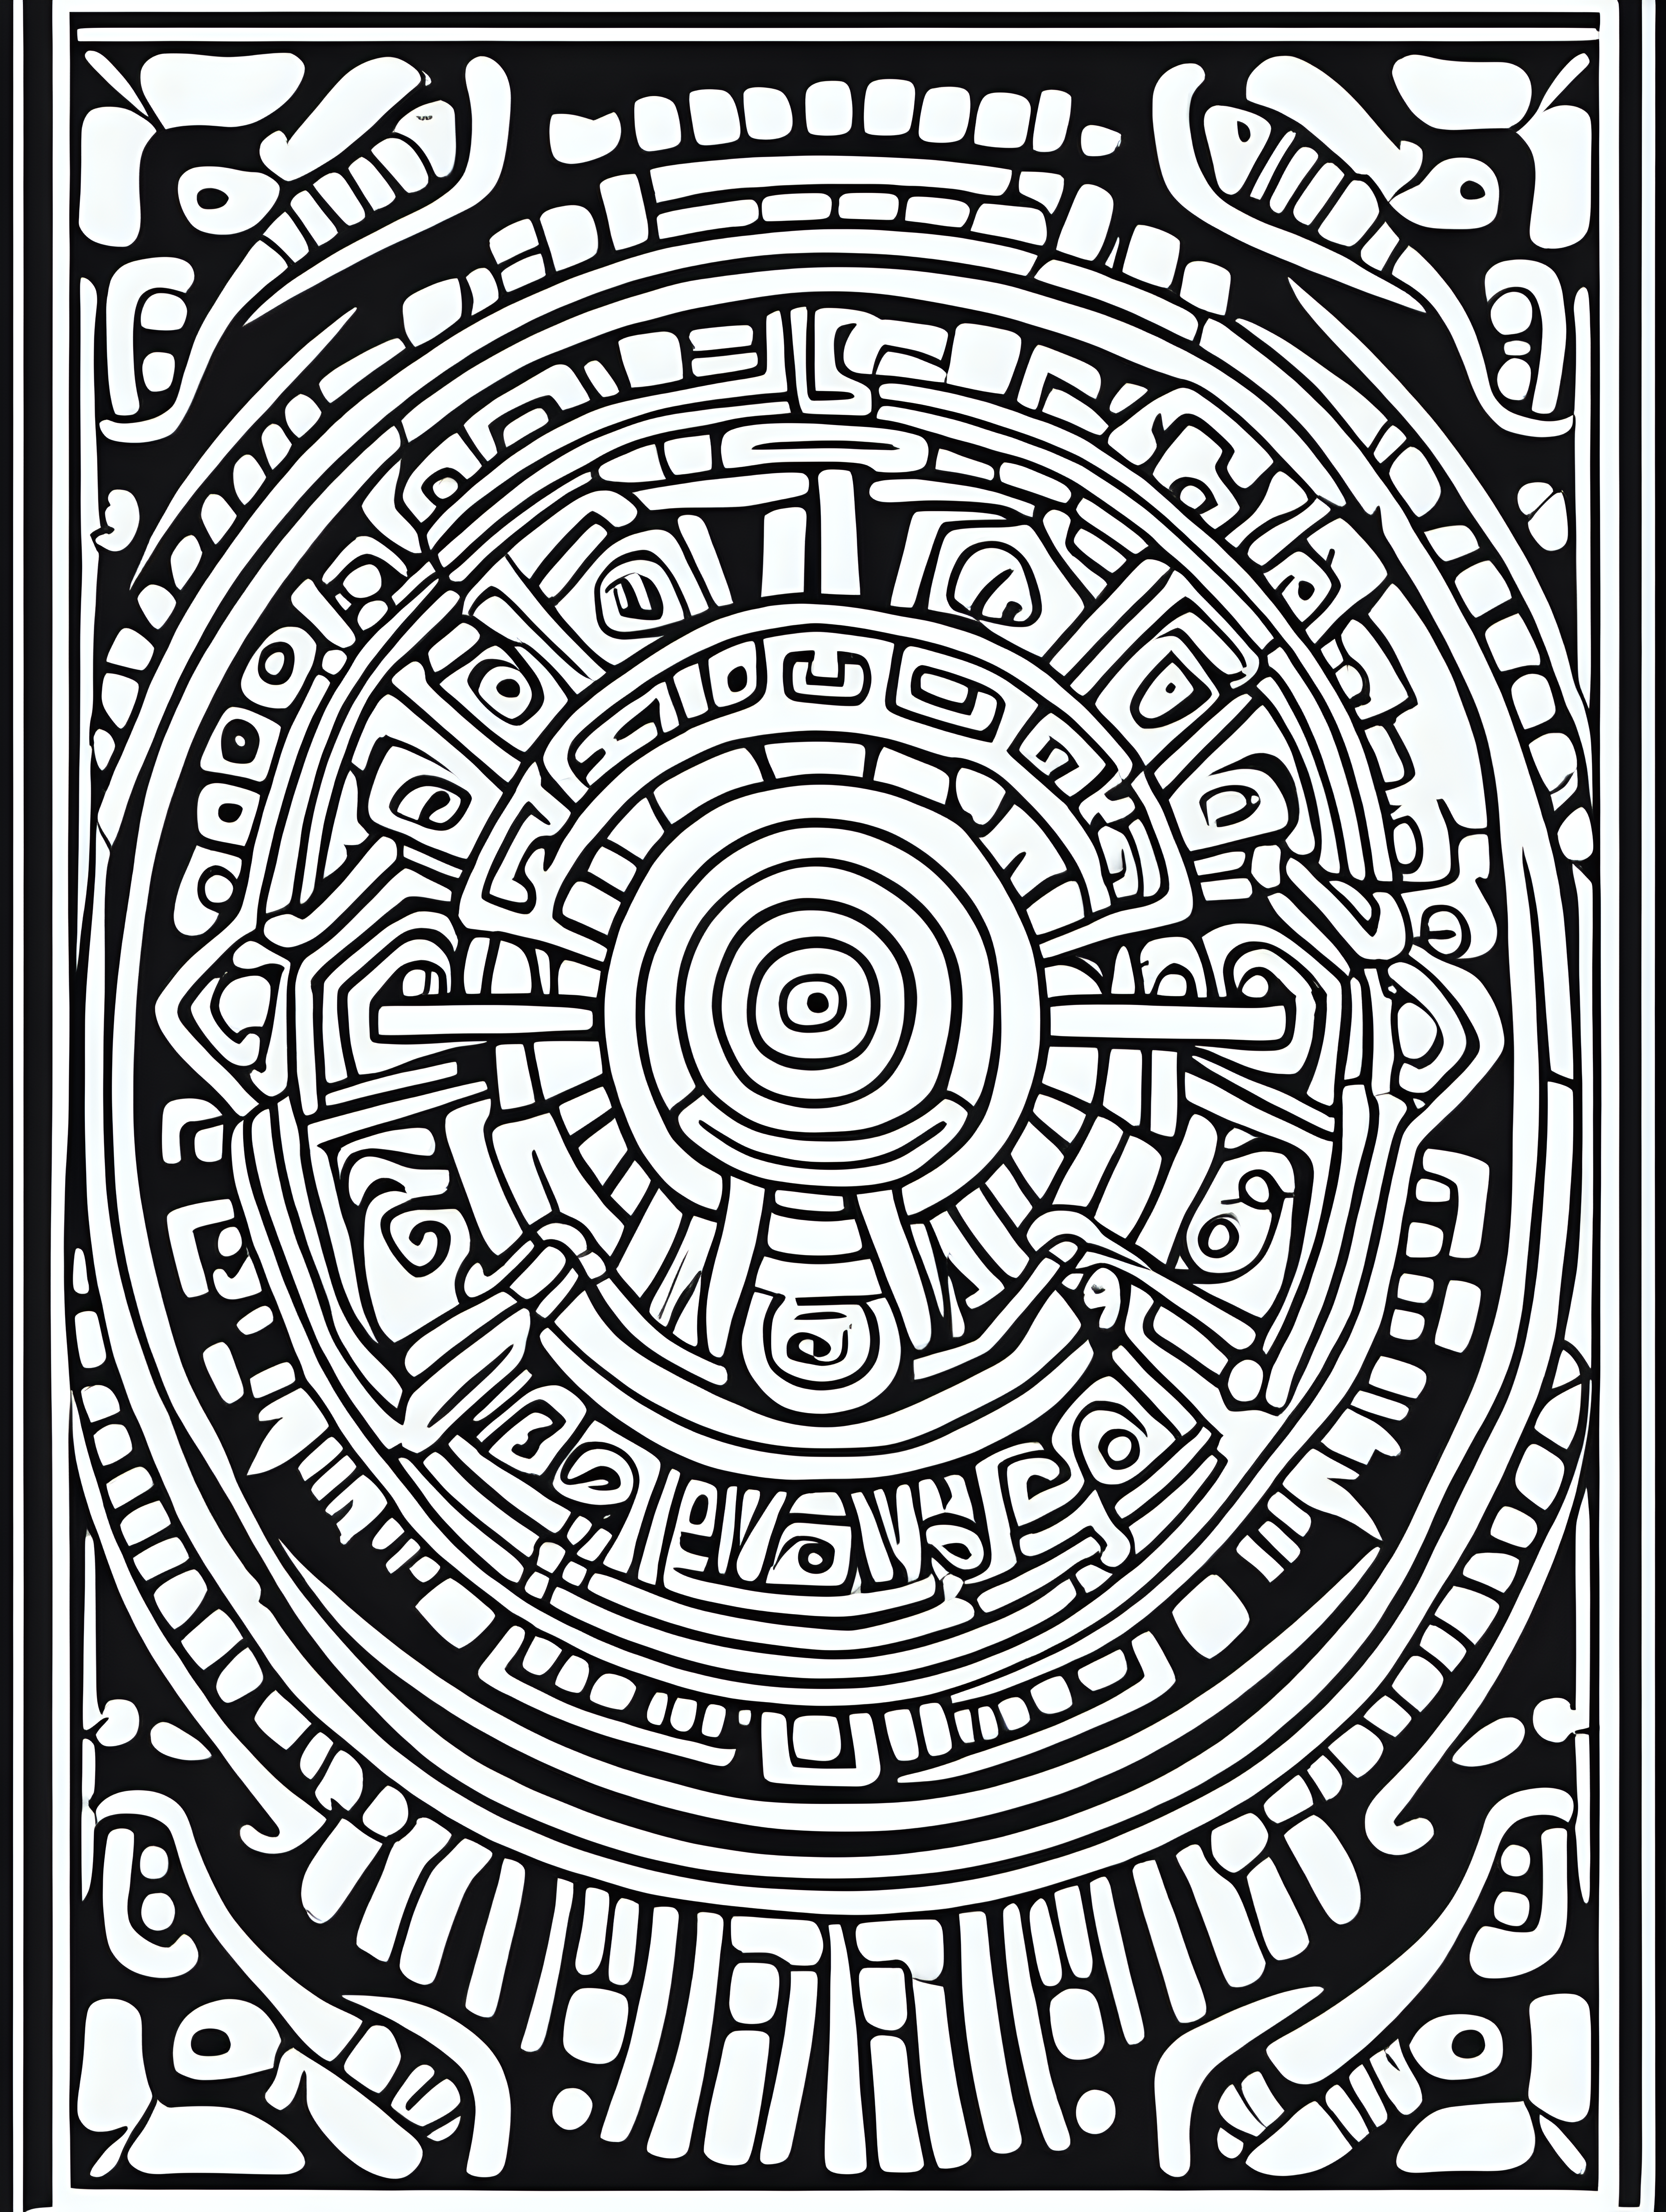 mayan design ,coloring page, simple draw, no colors, abstract background